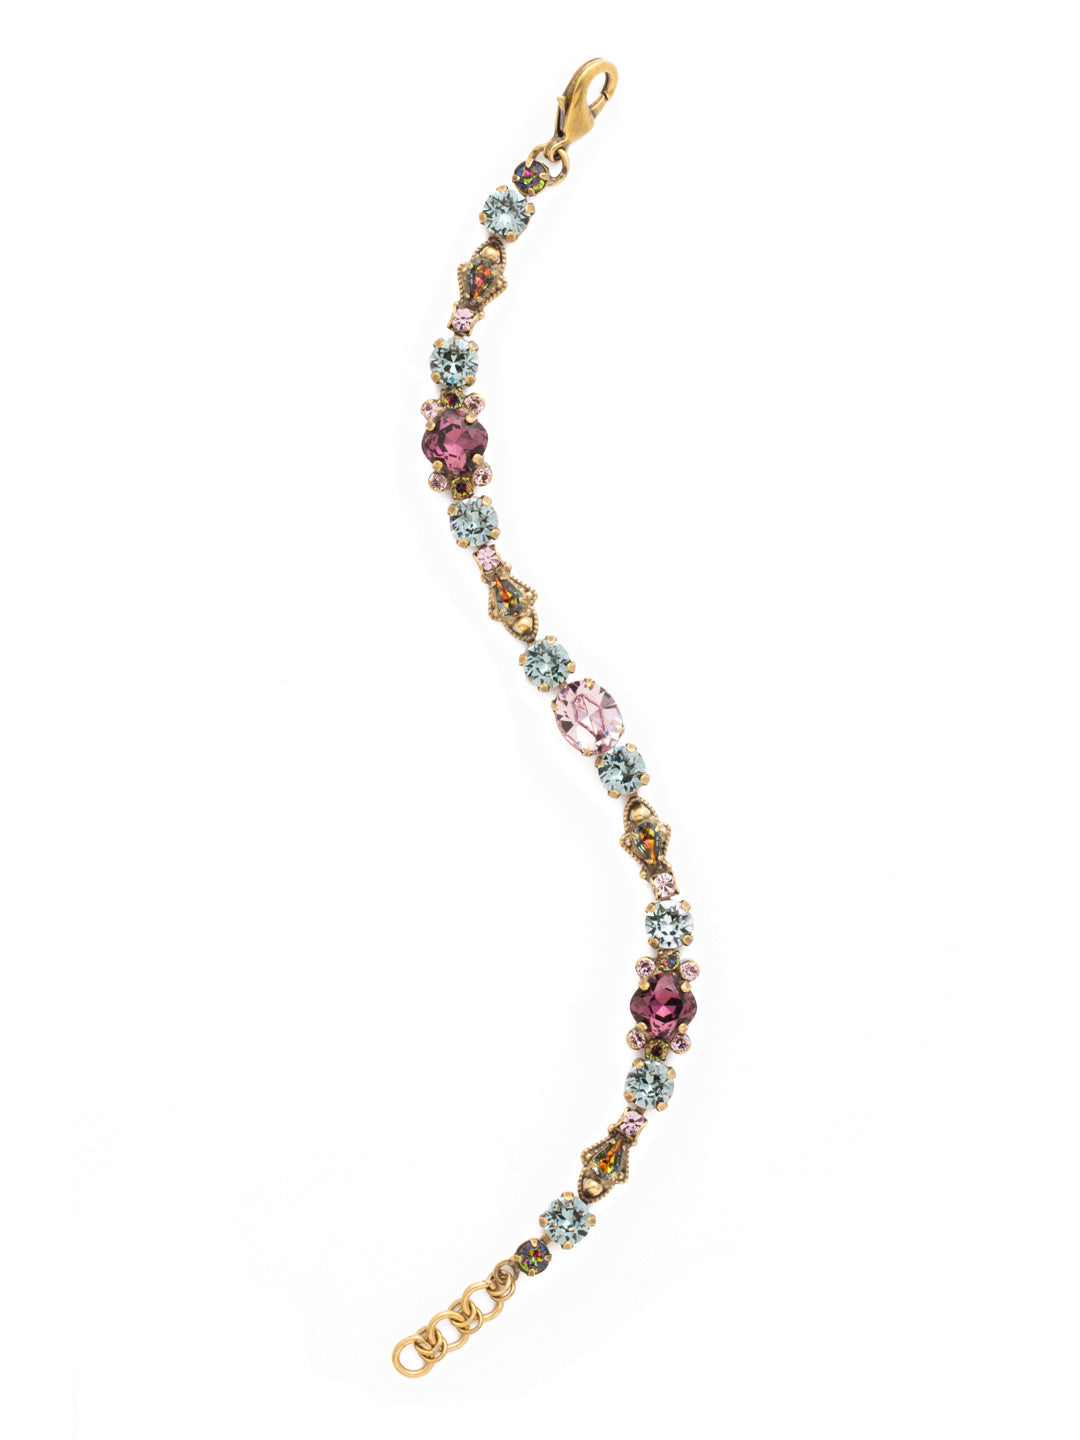 Mirabella Line Bracelet - BDS1AGROP - <p>A repeating pattern of mixed crystal colors and shapes featuring an oval cut crystal in the middle. The lobster clasp and extender chain make the bracelet easy to adjust to your desired length. This classic line bracelet is elegant and eclectic. It's a great stand alone piece or can be worn as a fashion statement, mixing it with other bracelets. From Sorrelli's Royal Plum collection in our Antique Gold-tone finish.</p>